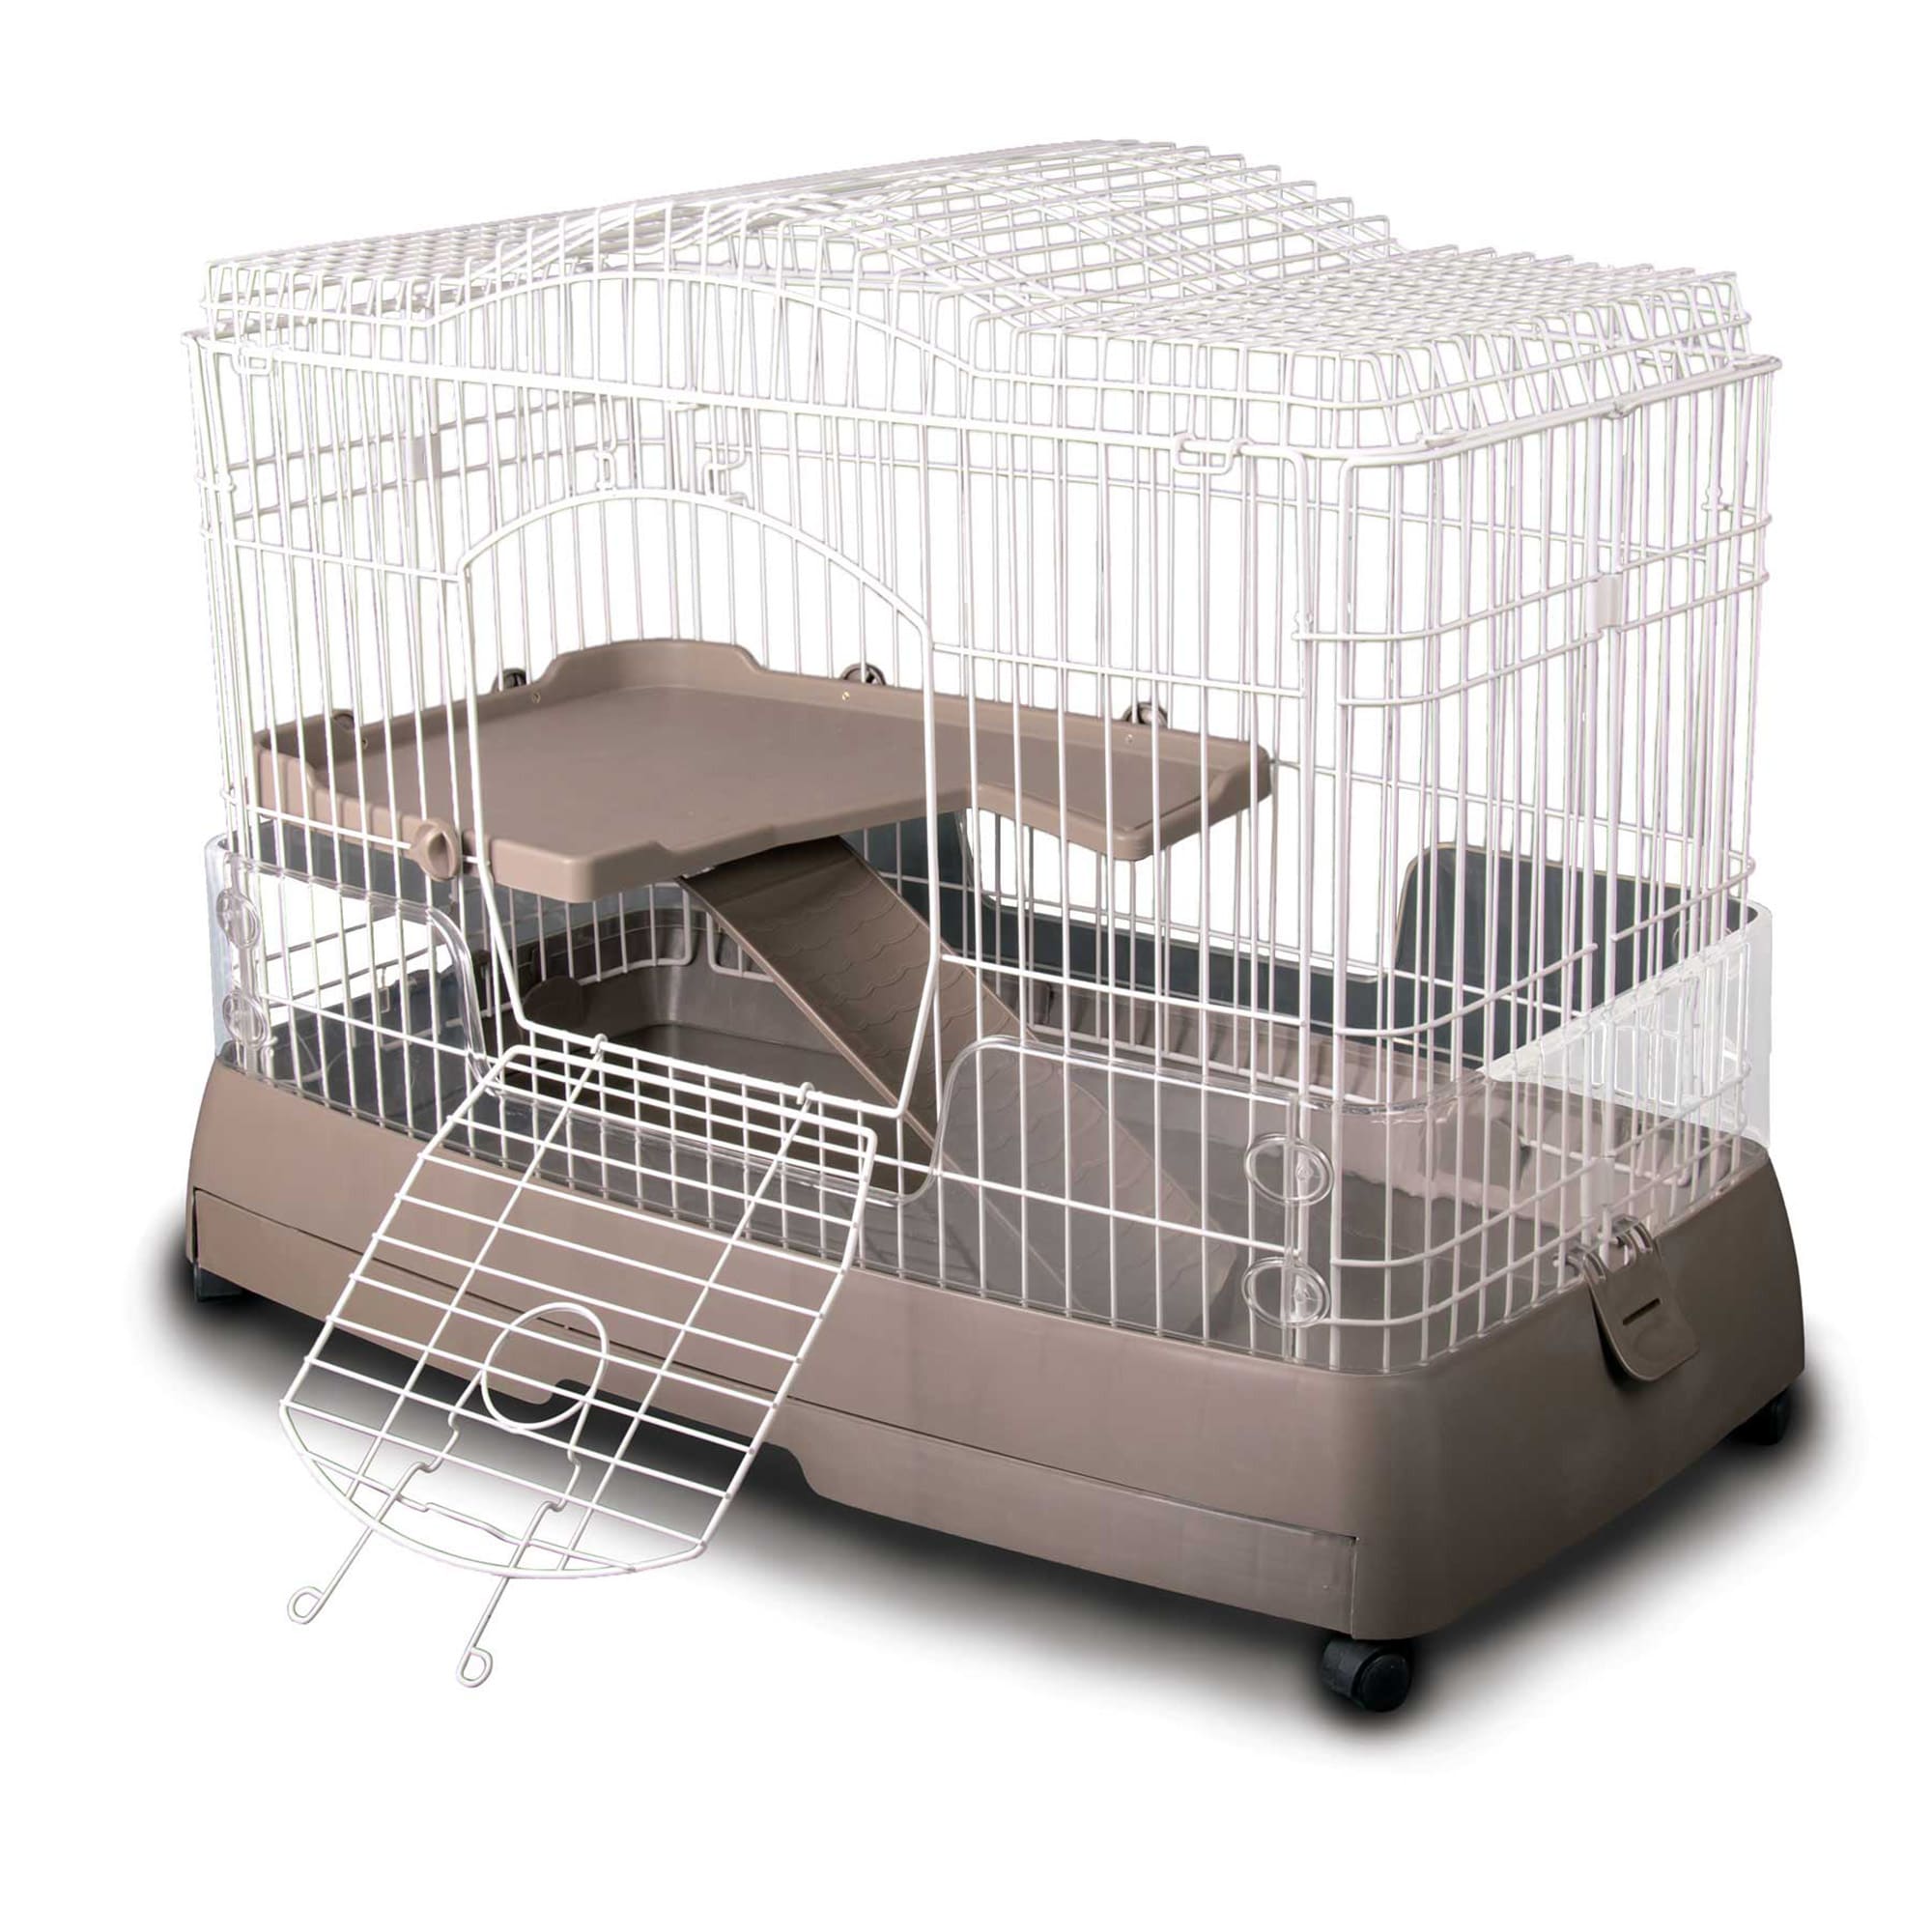 cleaning guinea pig cage